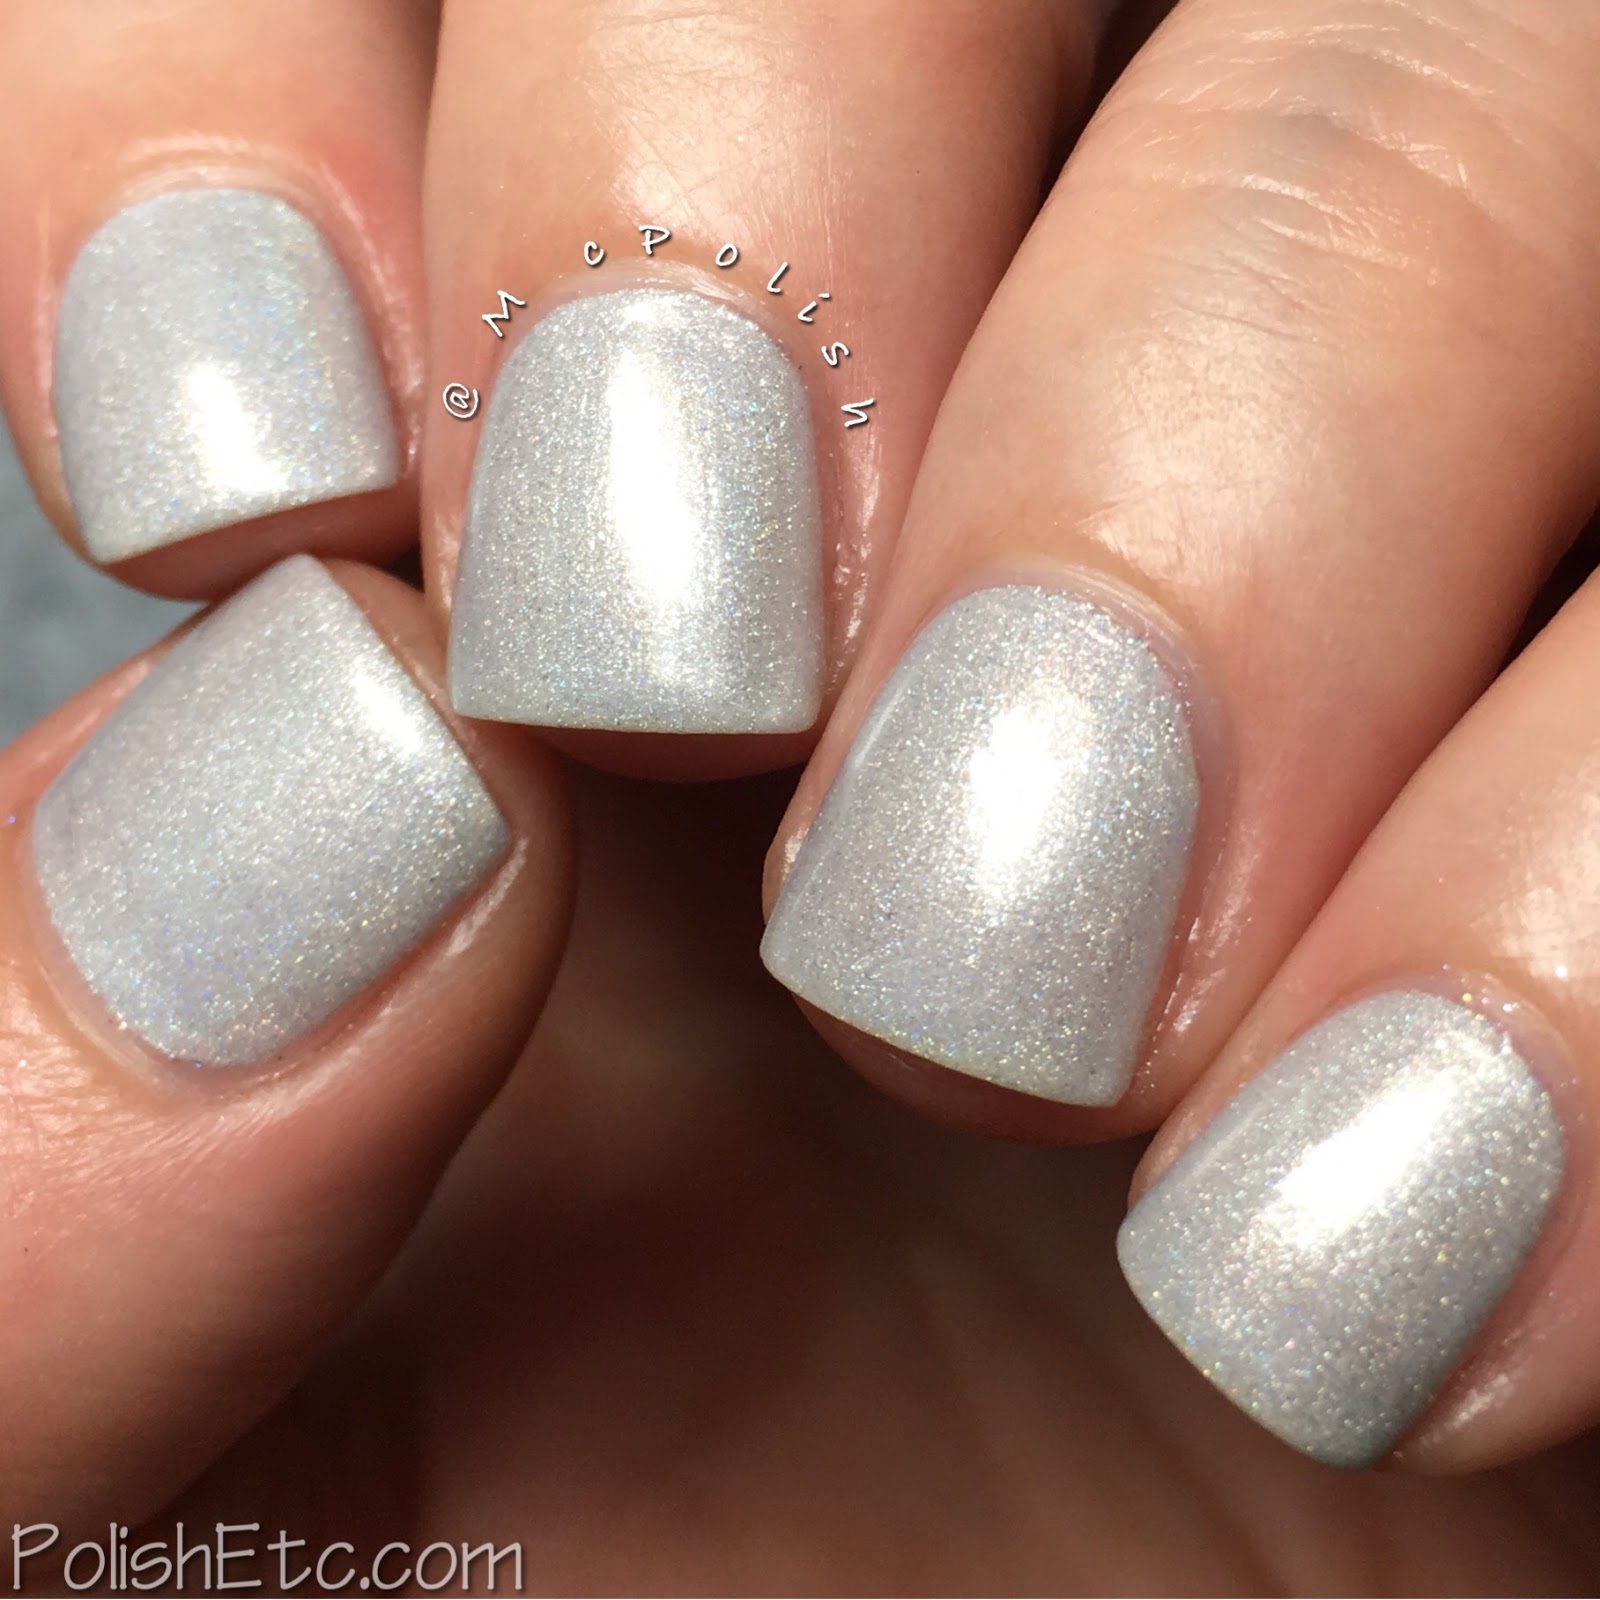 KBShimmer - Office Space Collection - McPolish - Makin' Copies